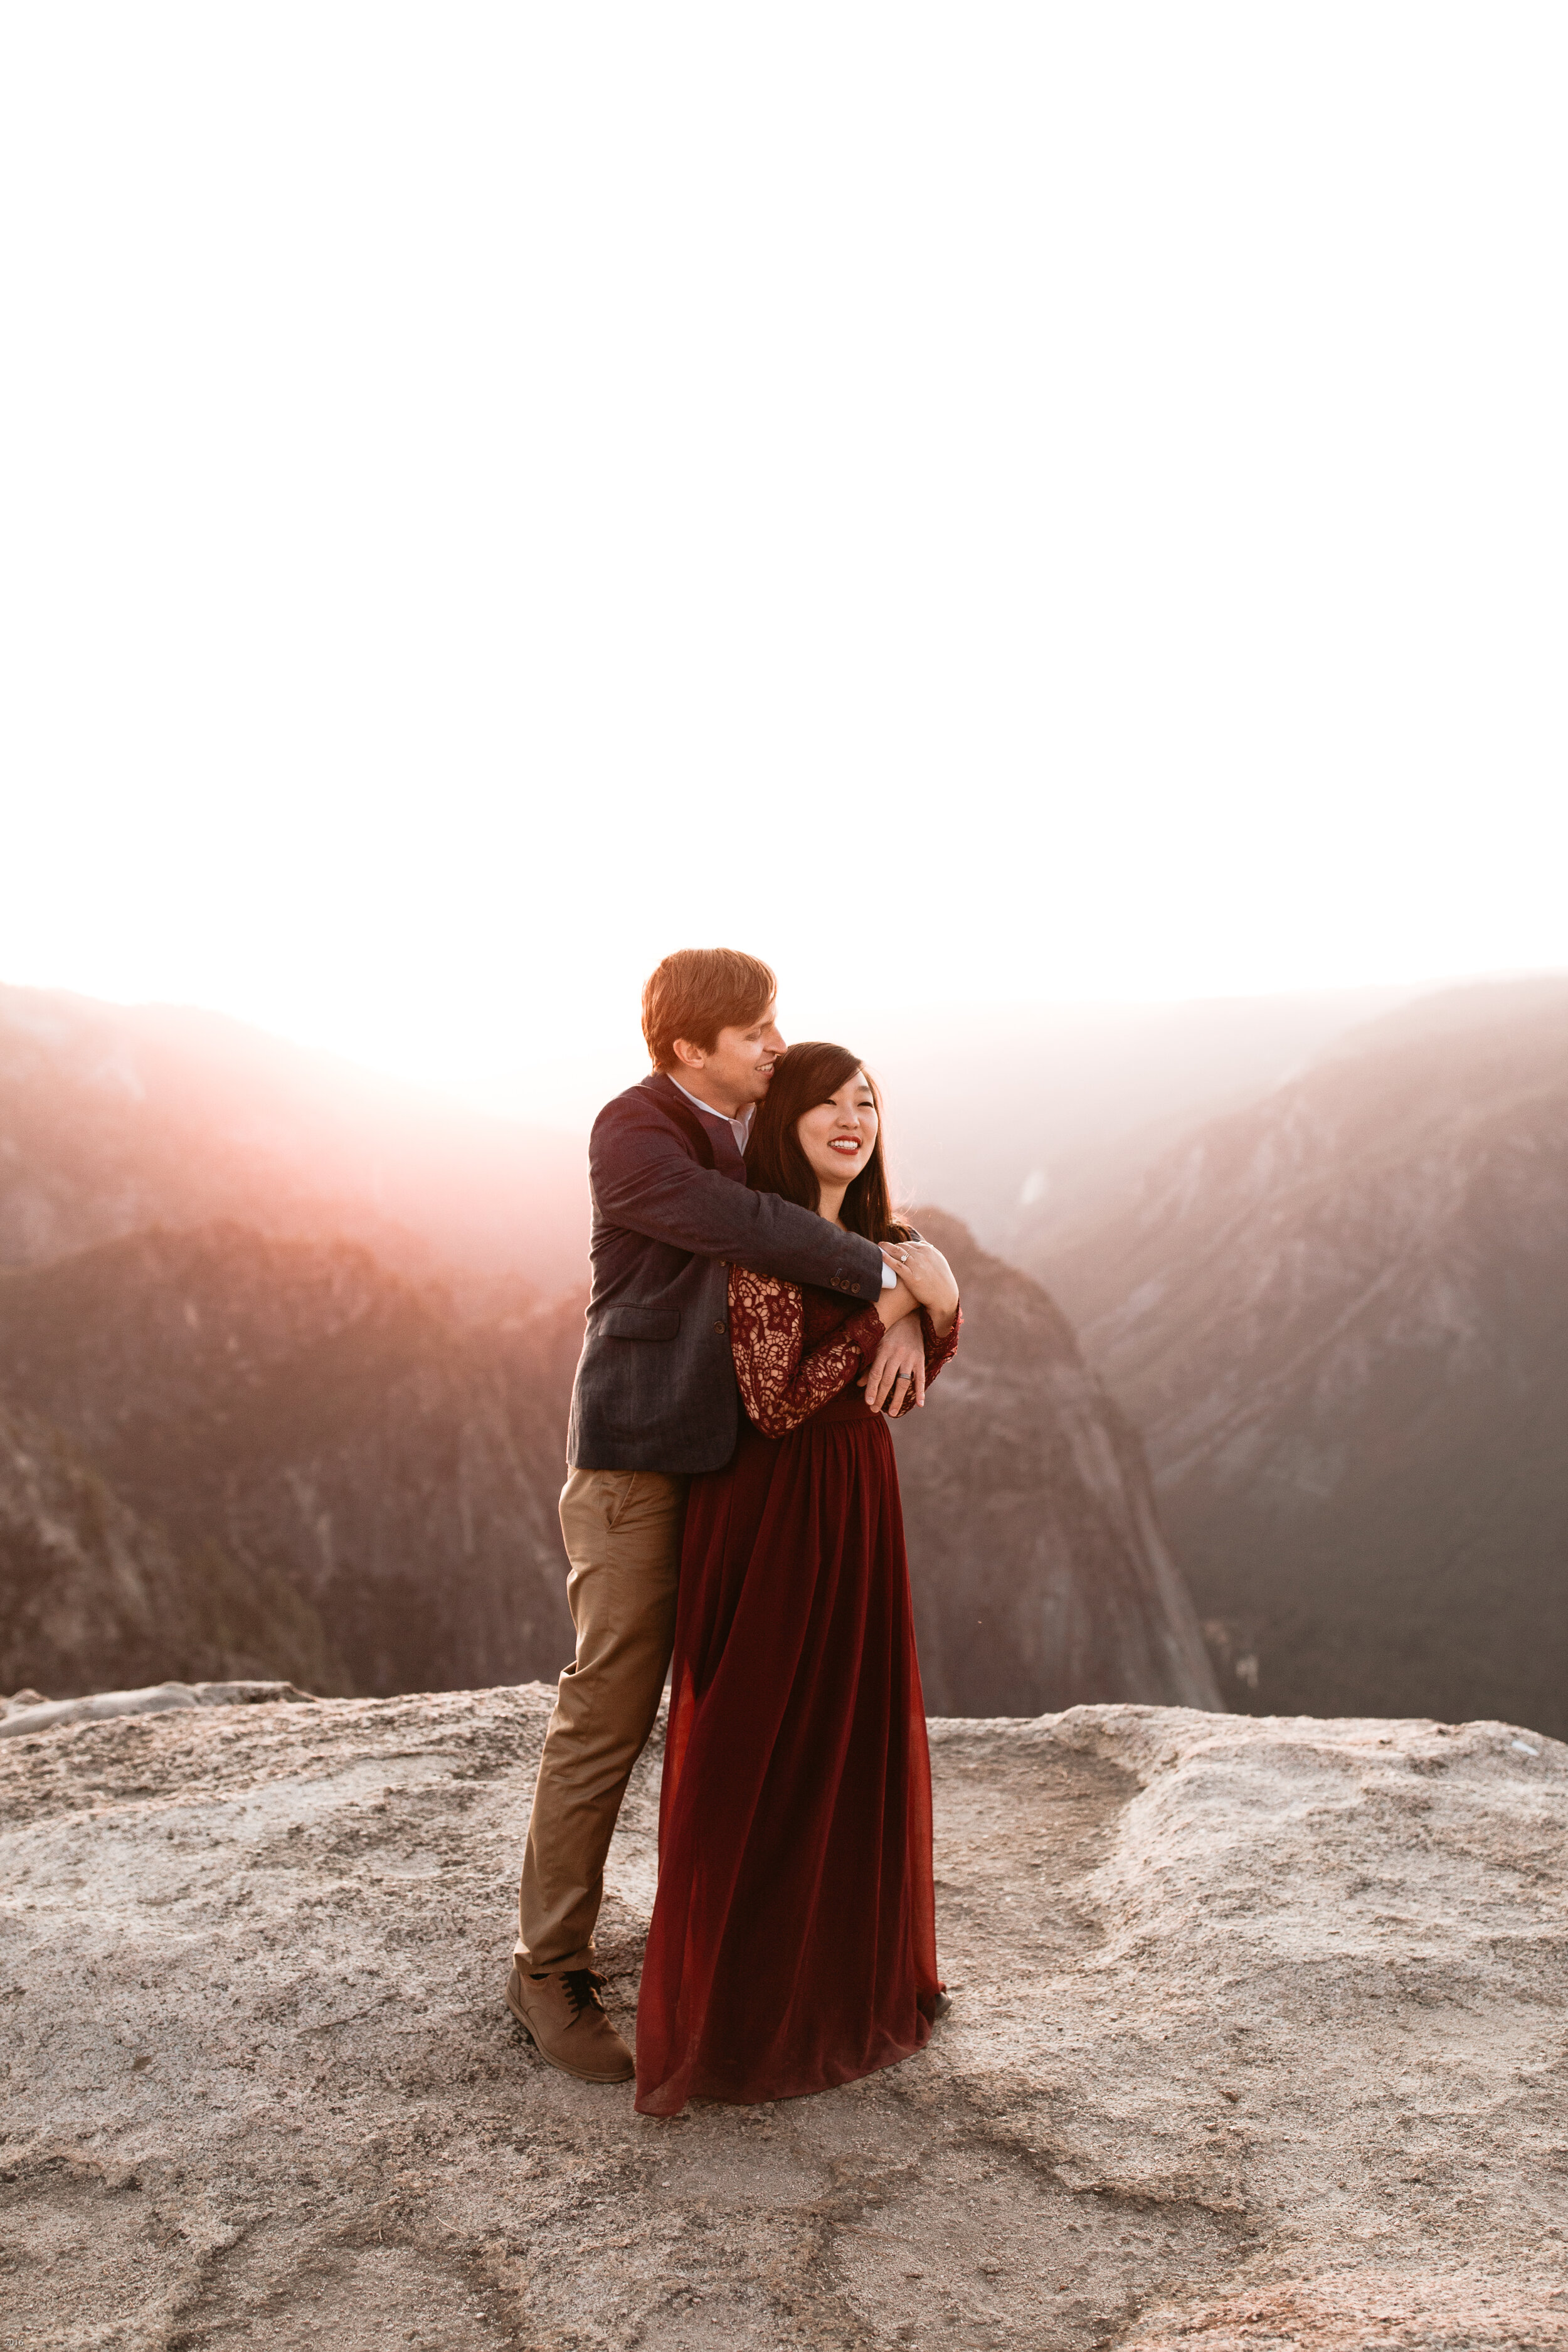 yosemite-national-park-couples-session-at-taft-point-and-yosemite-valley-yosemite-elopement-photographer-nicole-daacke-photography-165.jpg